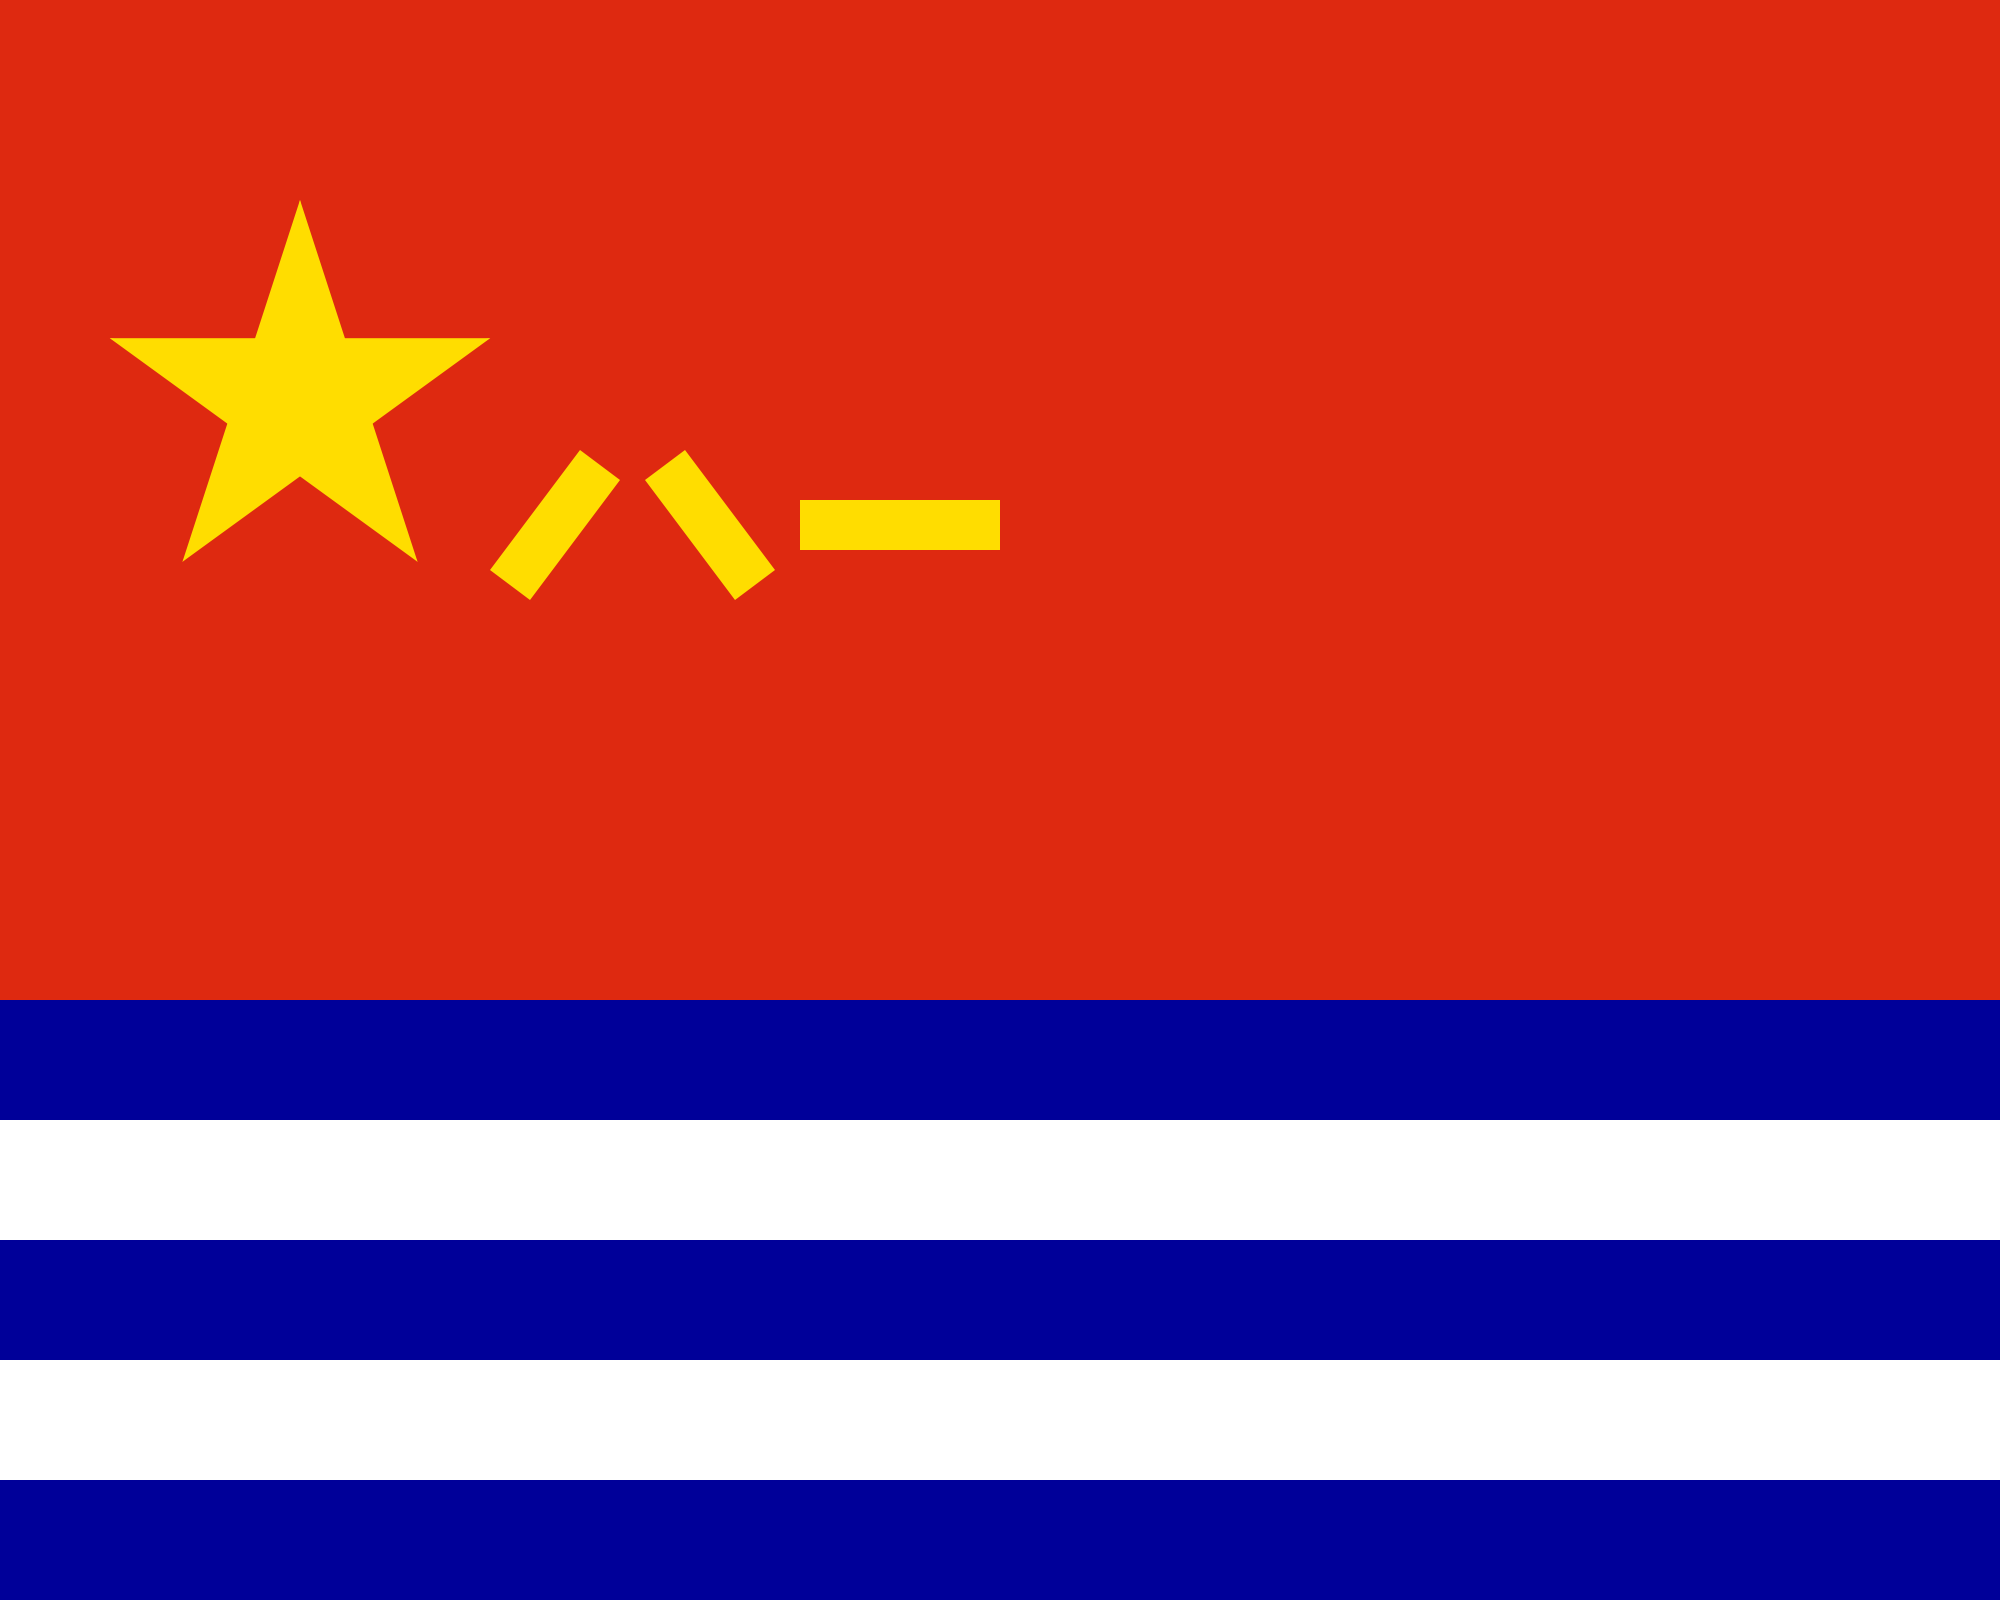 2000px-Naval_Ensign_of_the_People's_Republic_of_China.svg